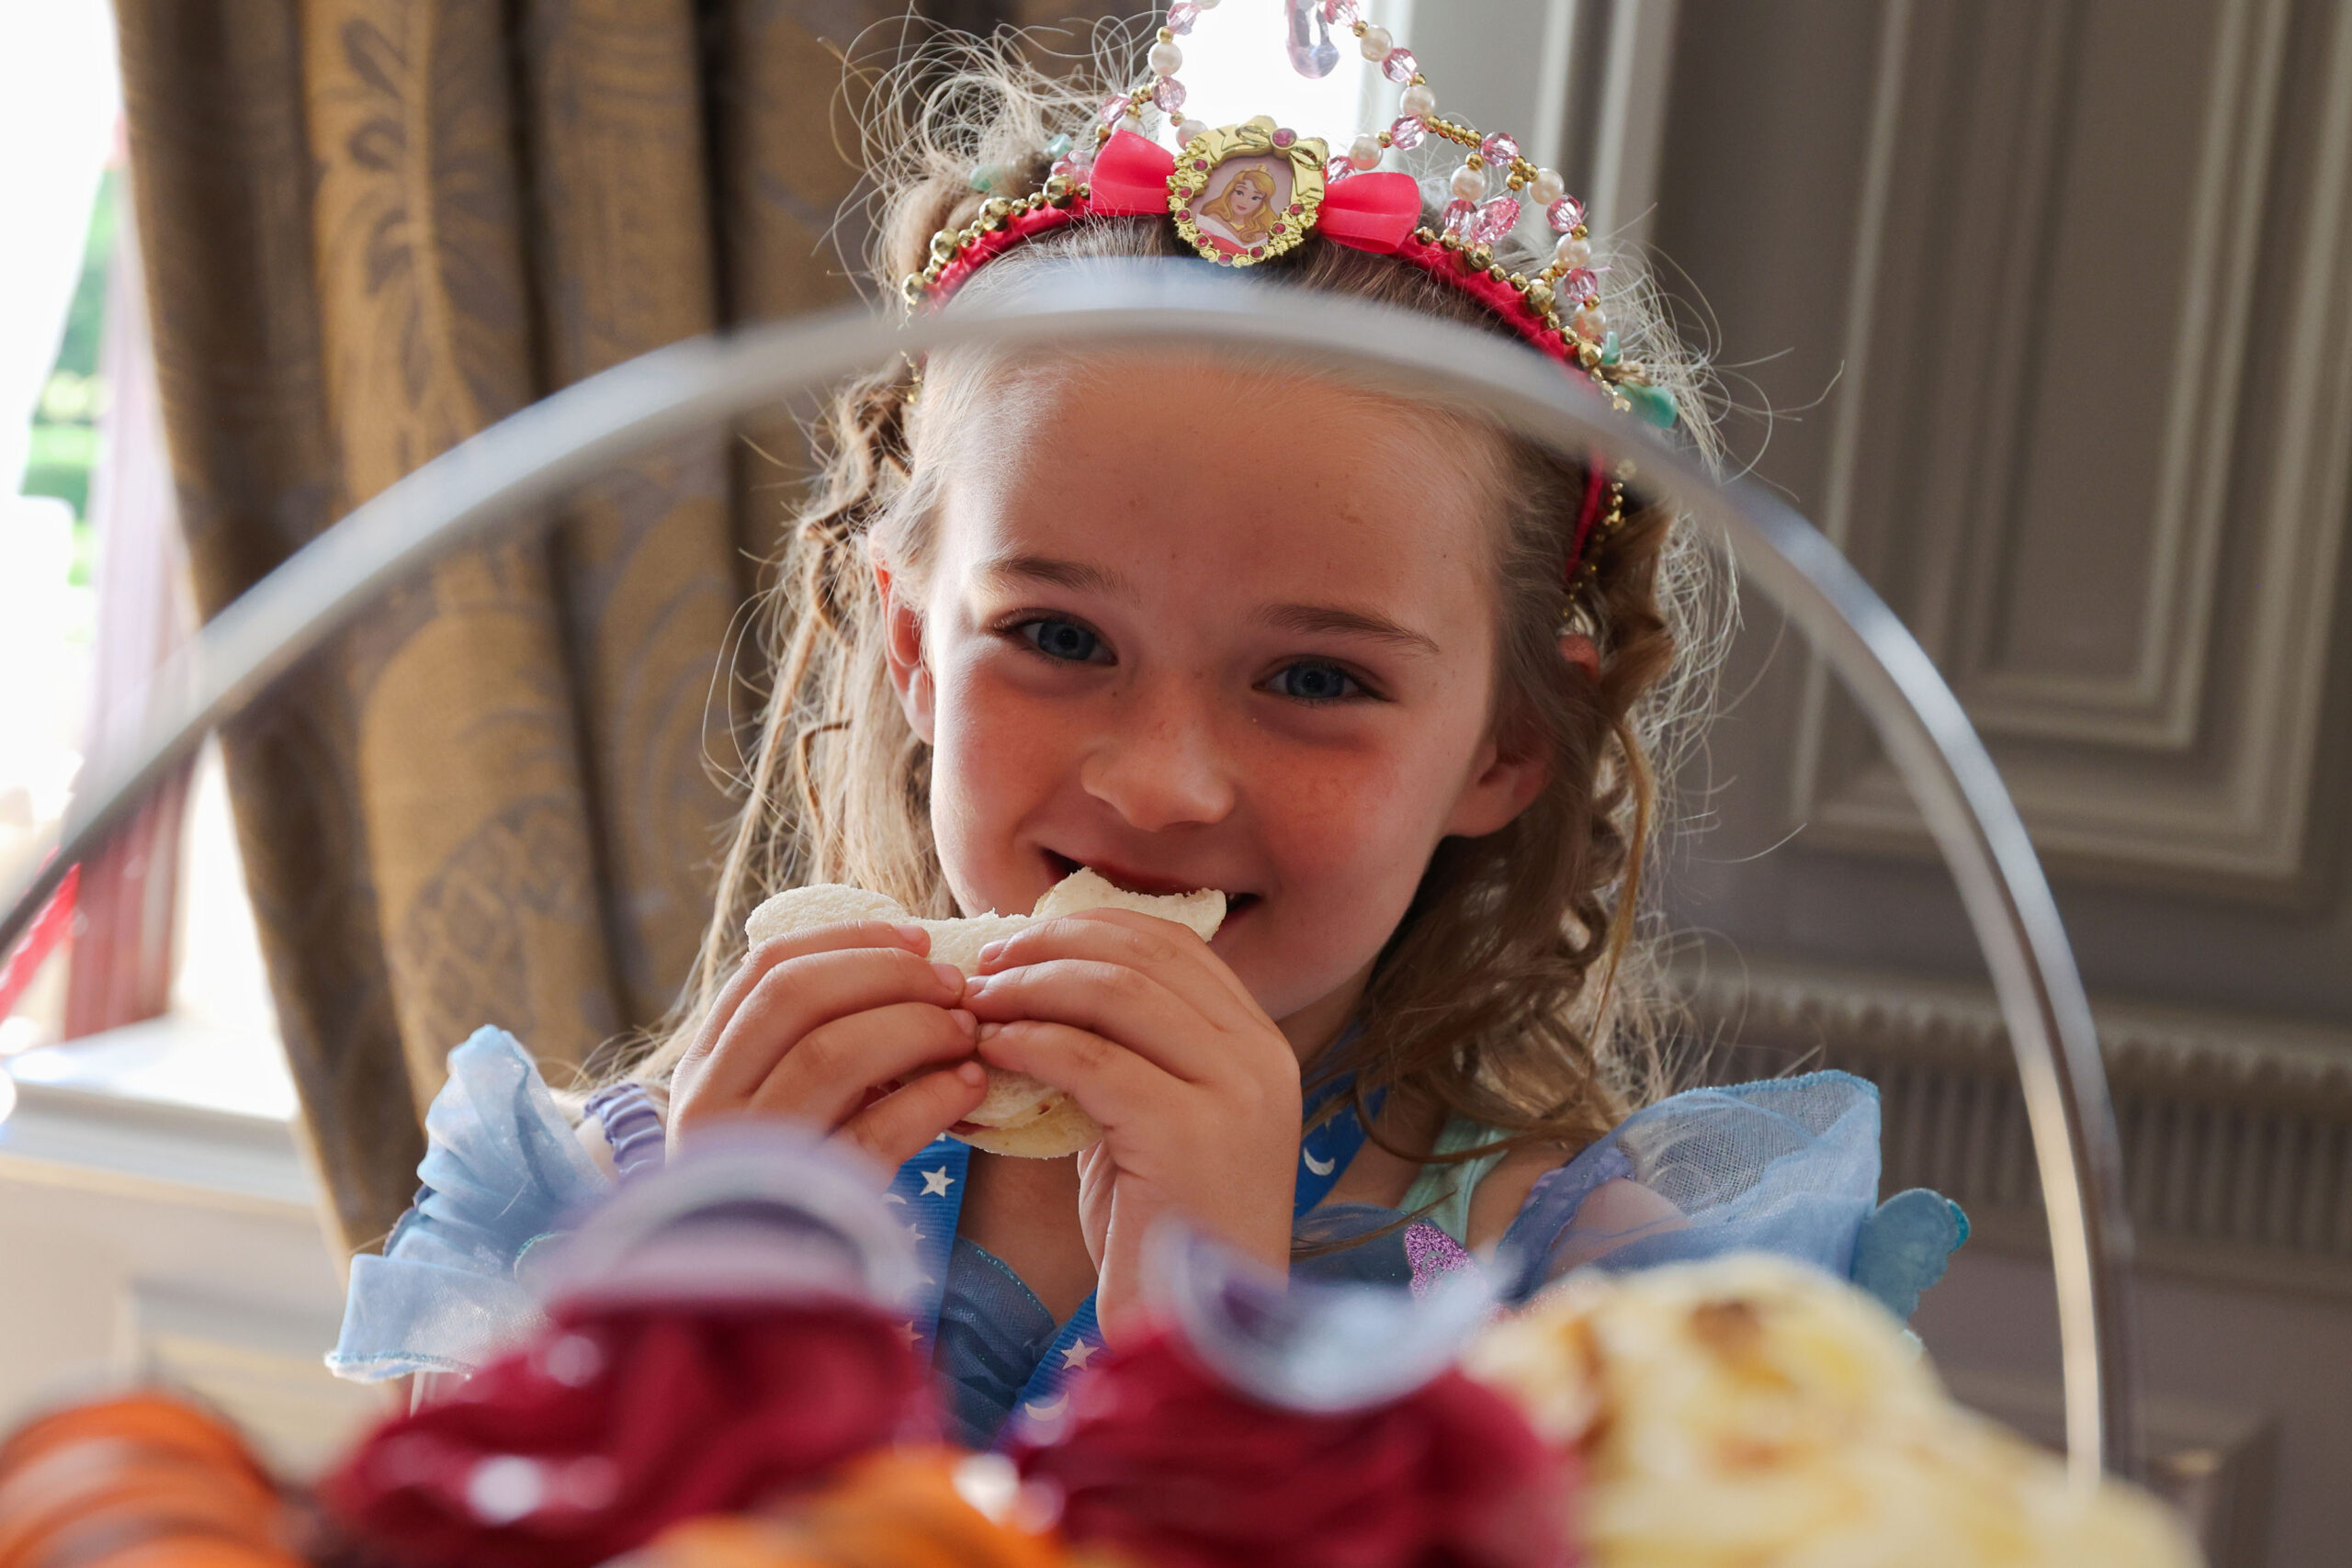 Seriously ill children and their families treated to a VIP Princess tea party fit for royalty thanks to Disney and Rays of Sunshine